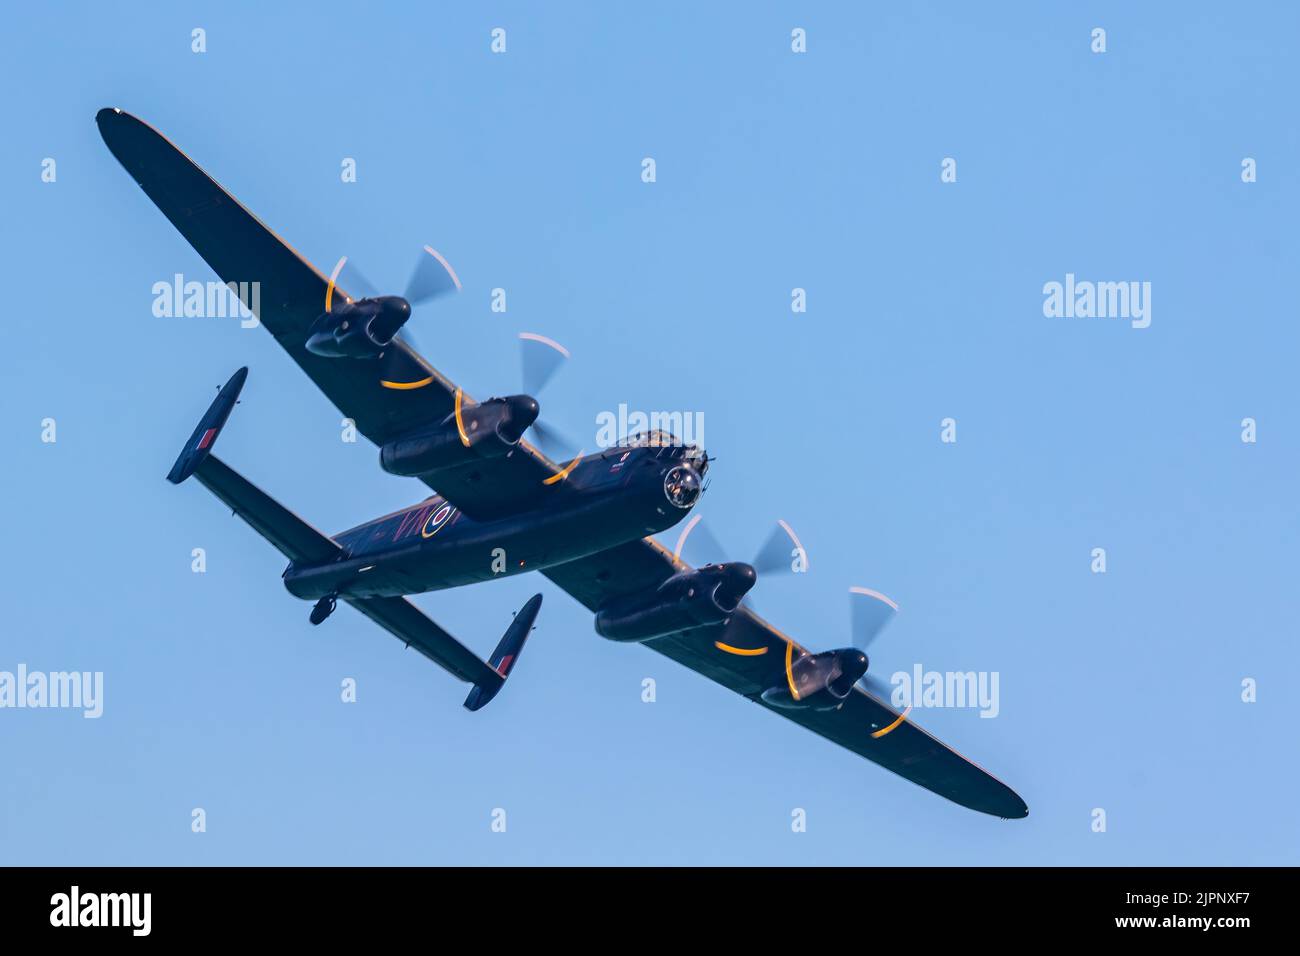 Eastbourne, Sussex, UK. 18th August 2022: The Battle of Britain display team in action over Eastbourne. With 2 spitfires and a Lancaster bomber. Stock Photo